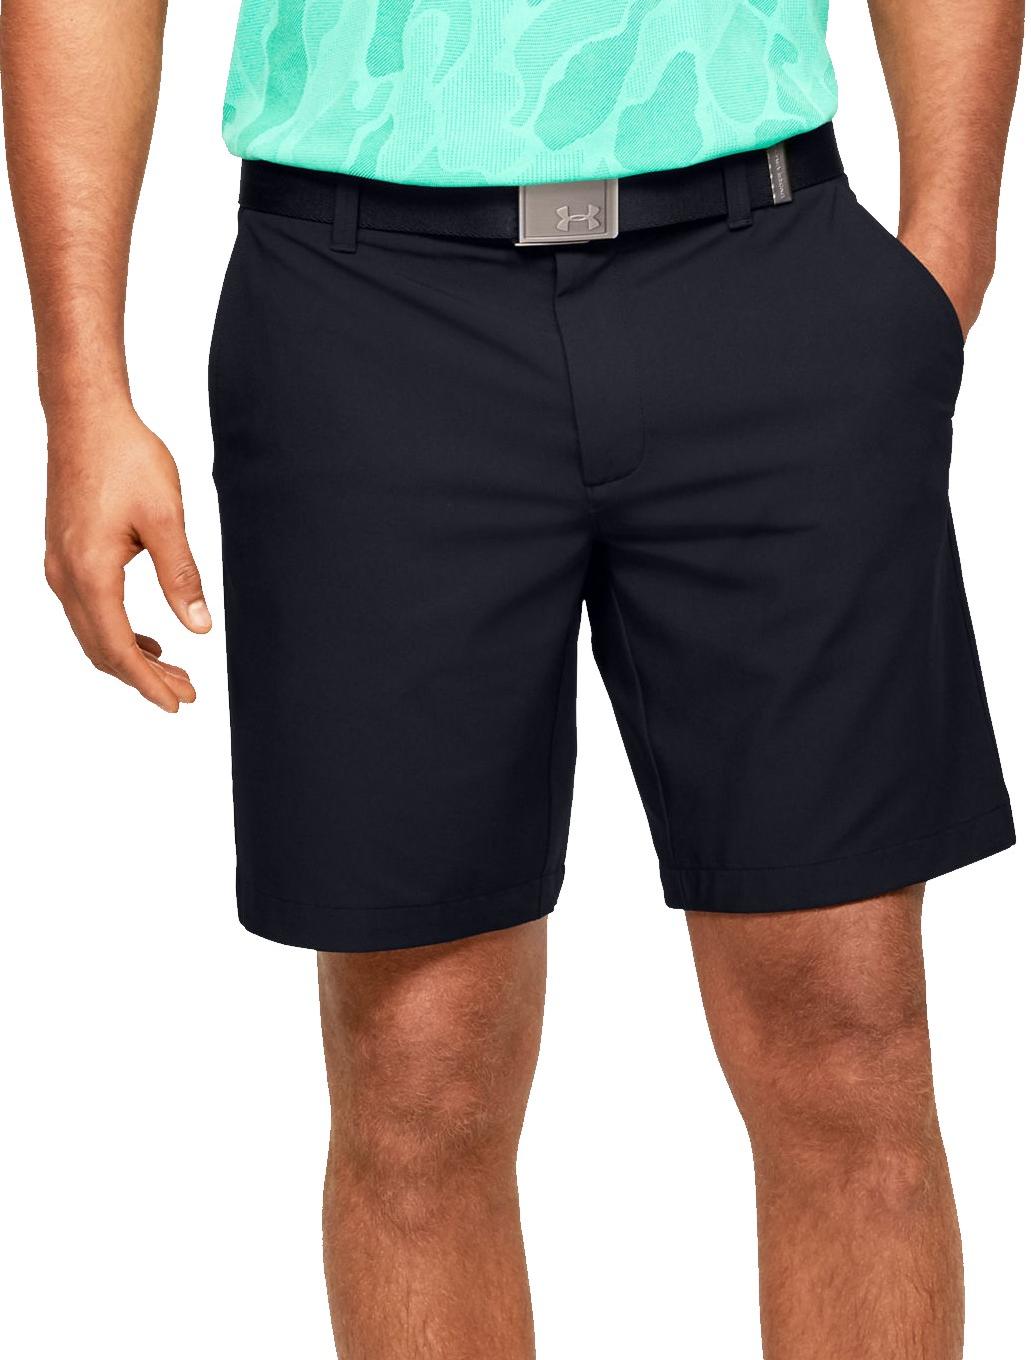 under armor iso chill shorts - Enjoy free shipping - OFF 60%